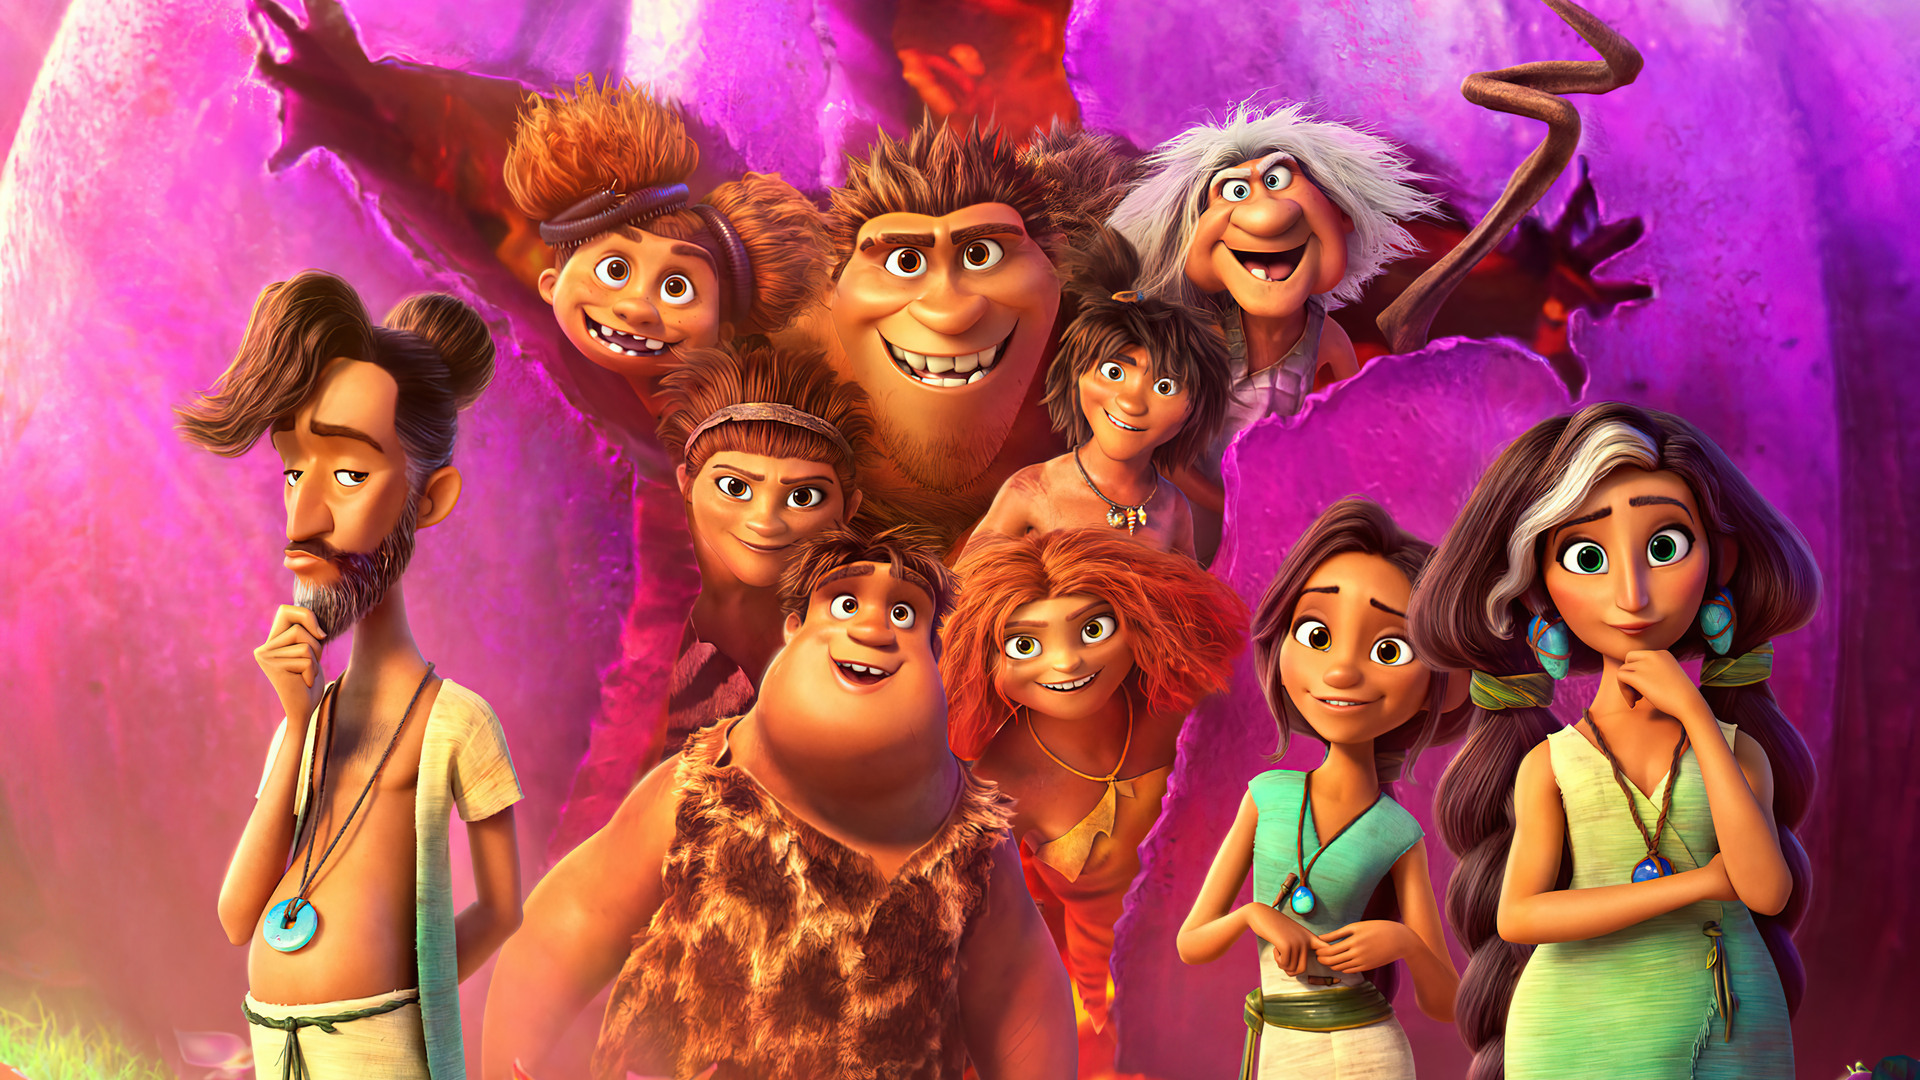 Movie The Croods: A New Age HD Wallpaper | Background Image